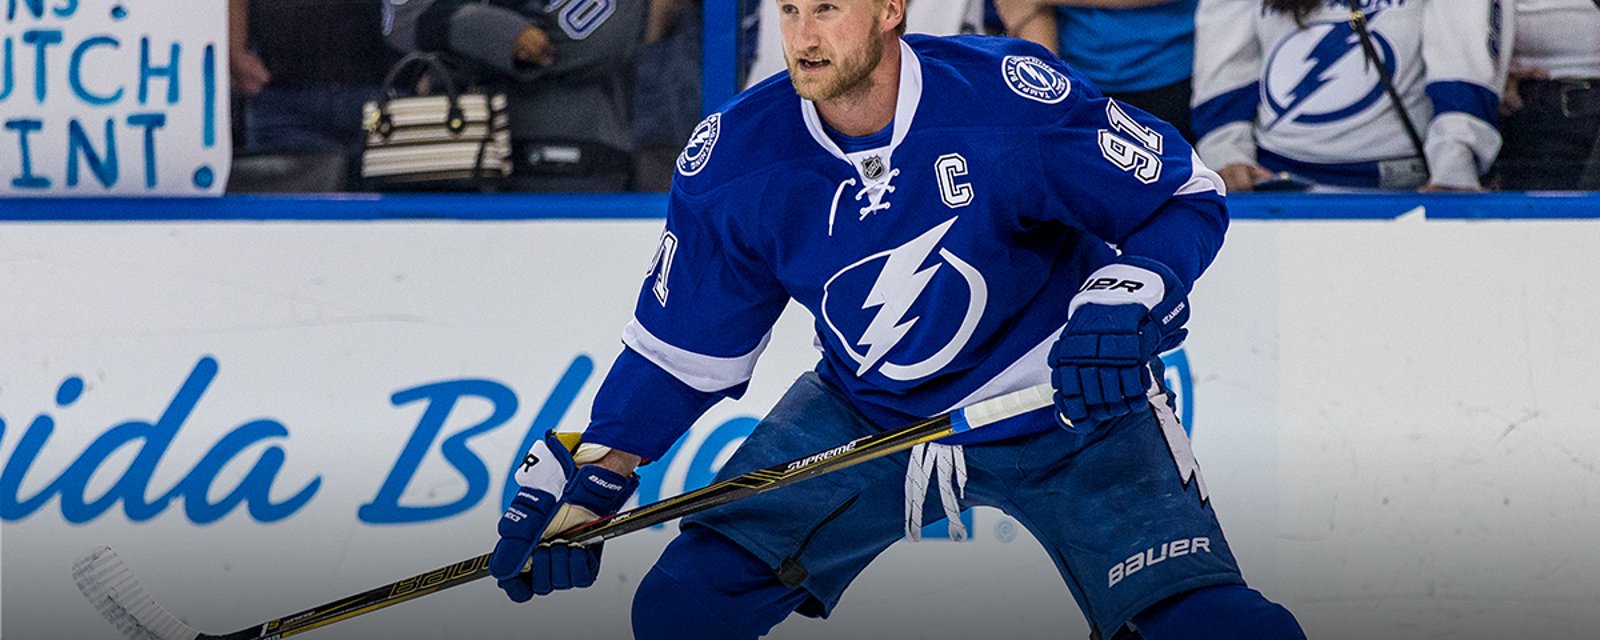 Report: Stamkos finally provides update on surgery and recovery